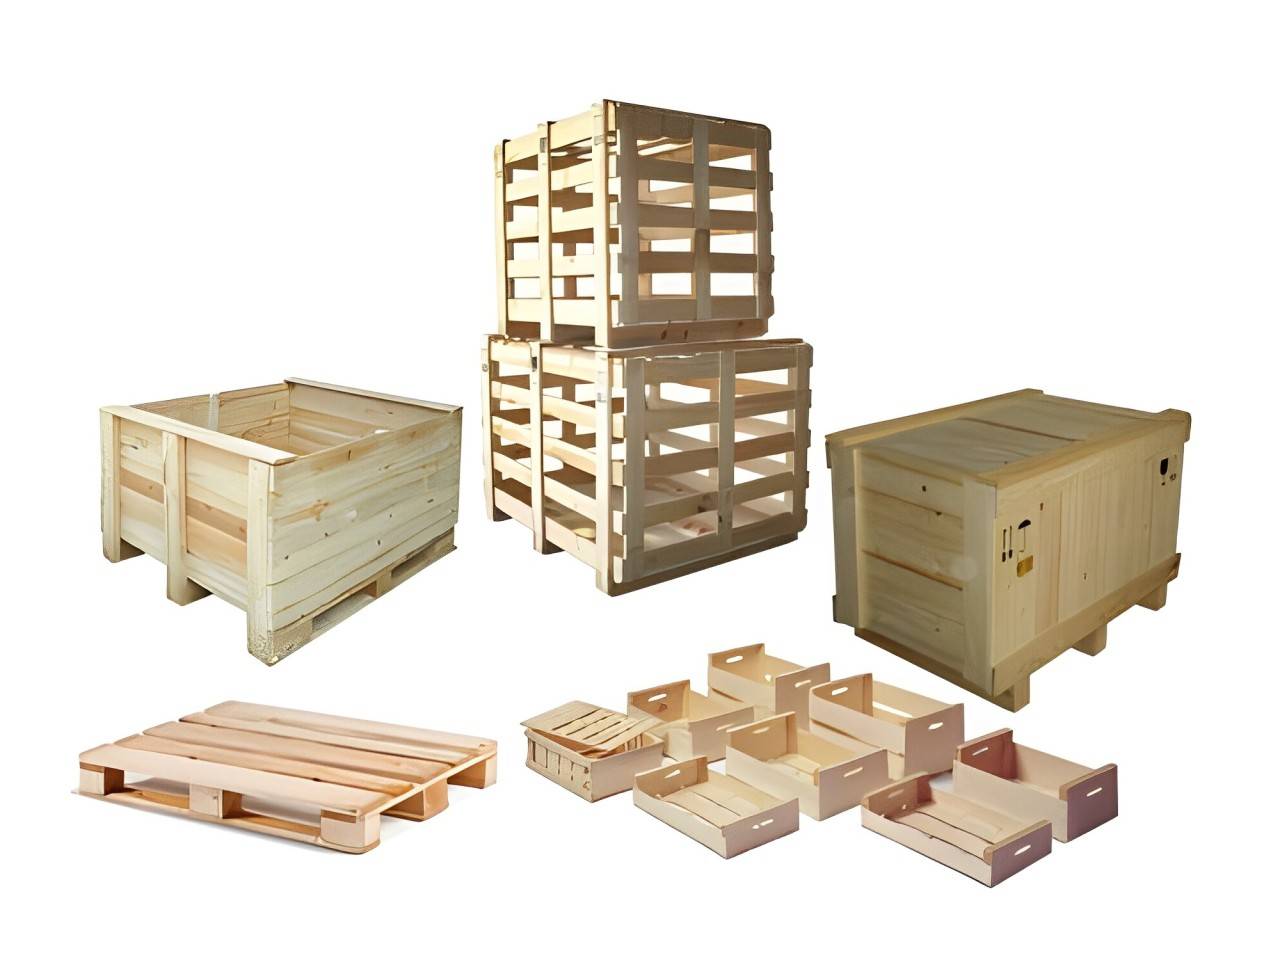 Wooden Boxes in Industrial Packaging